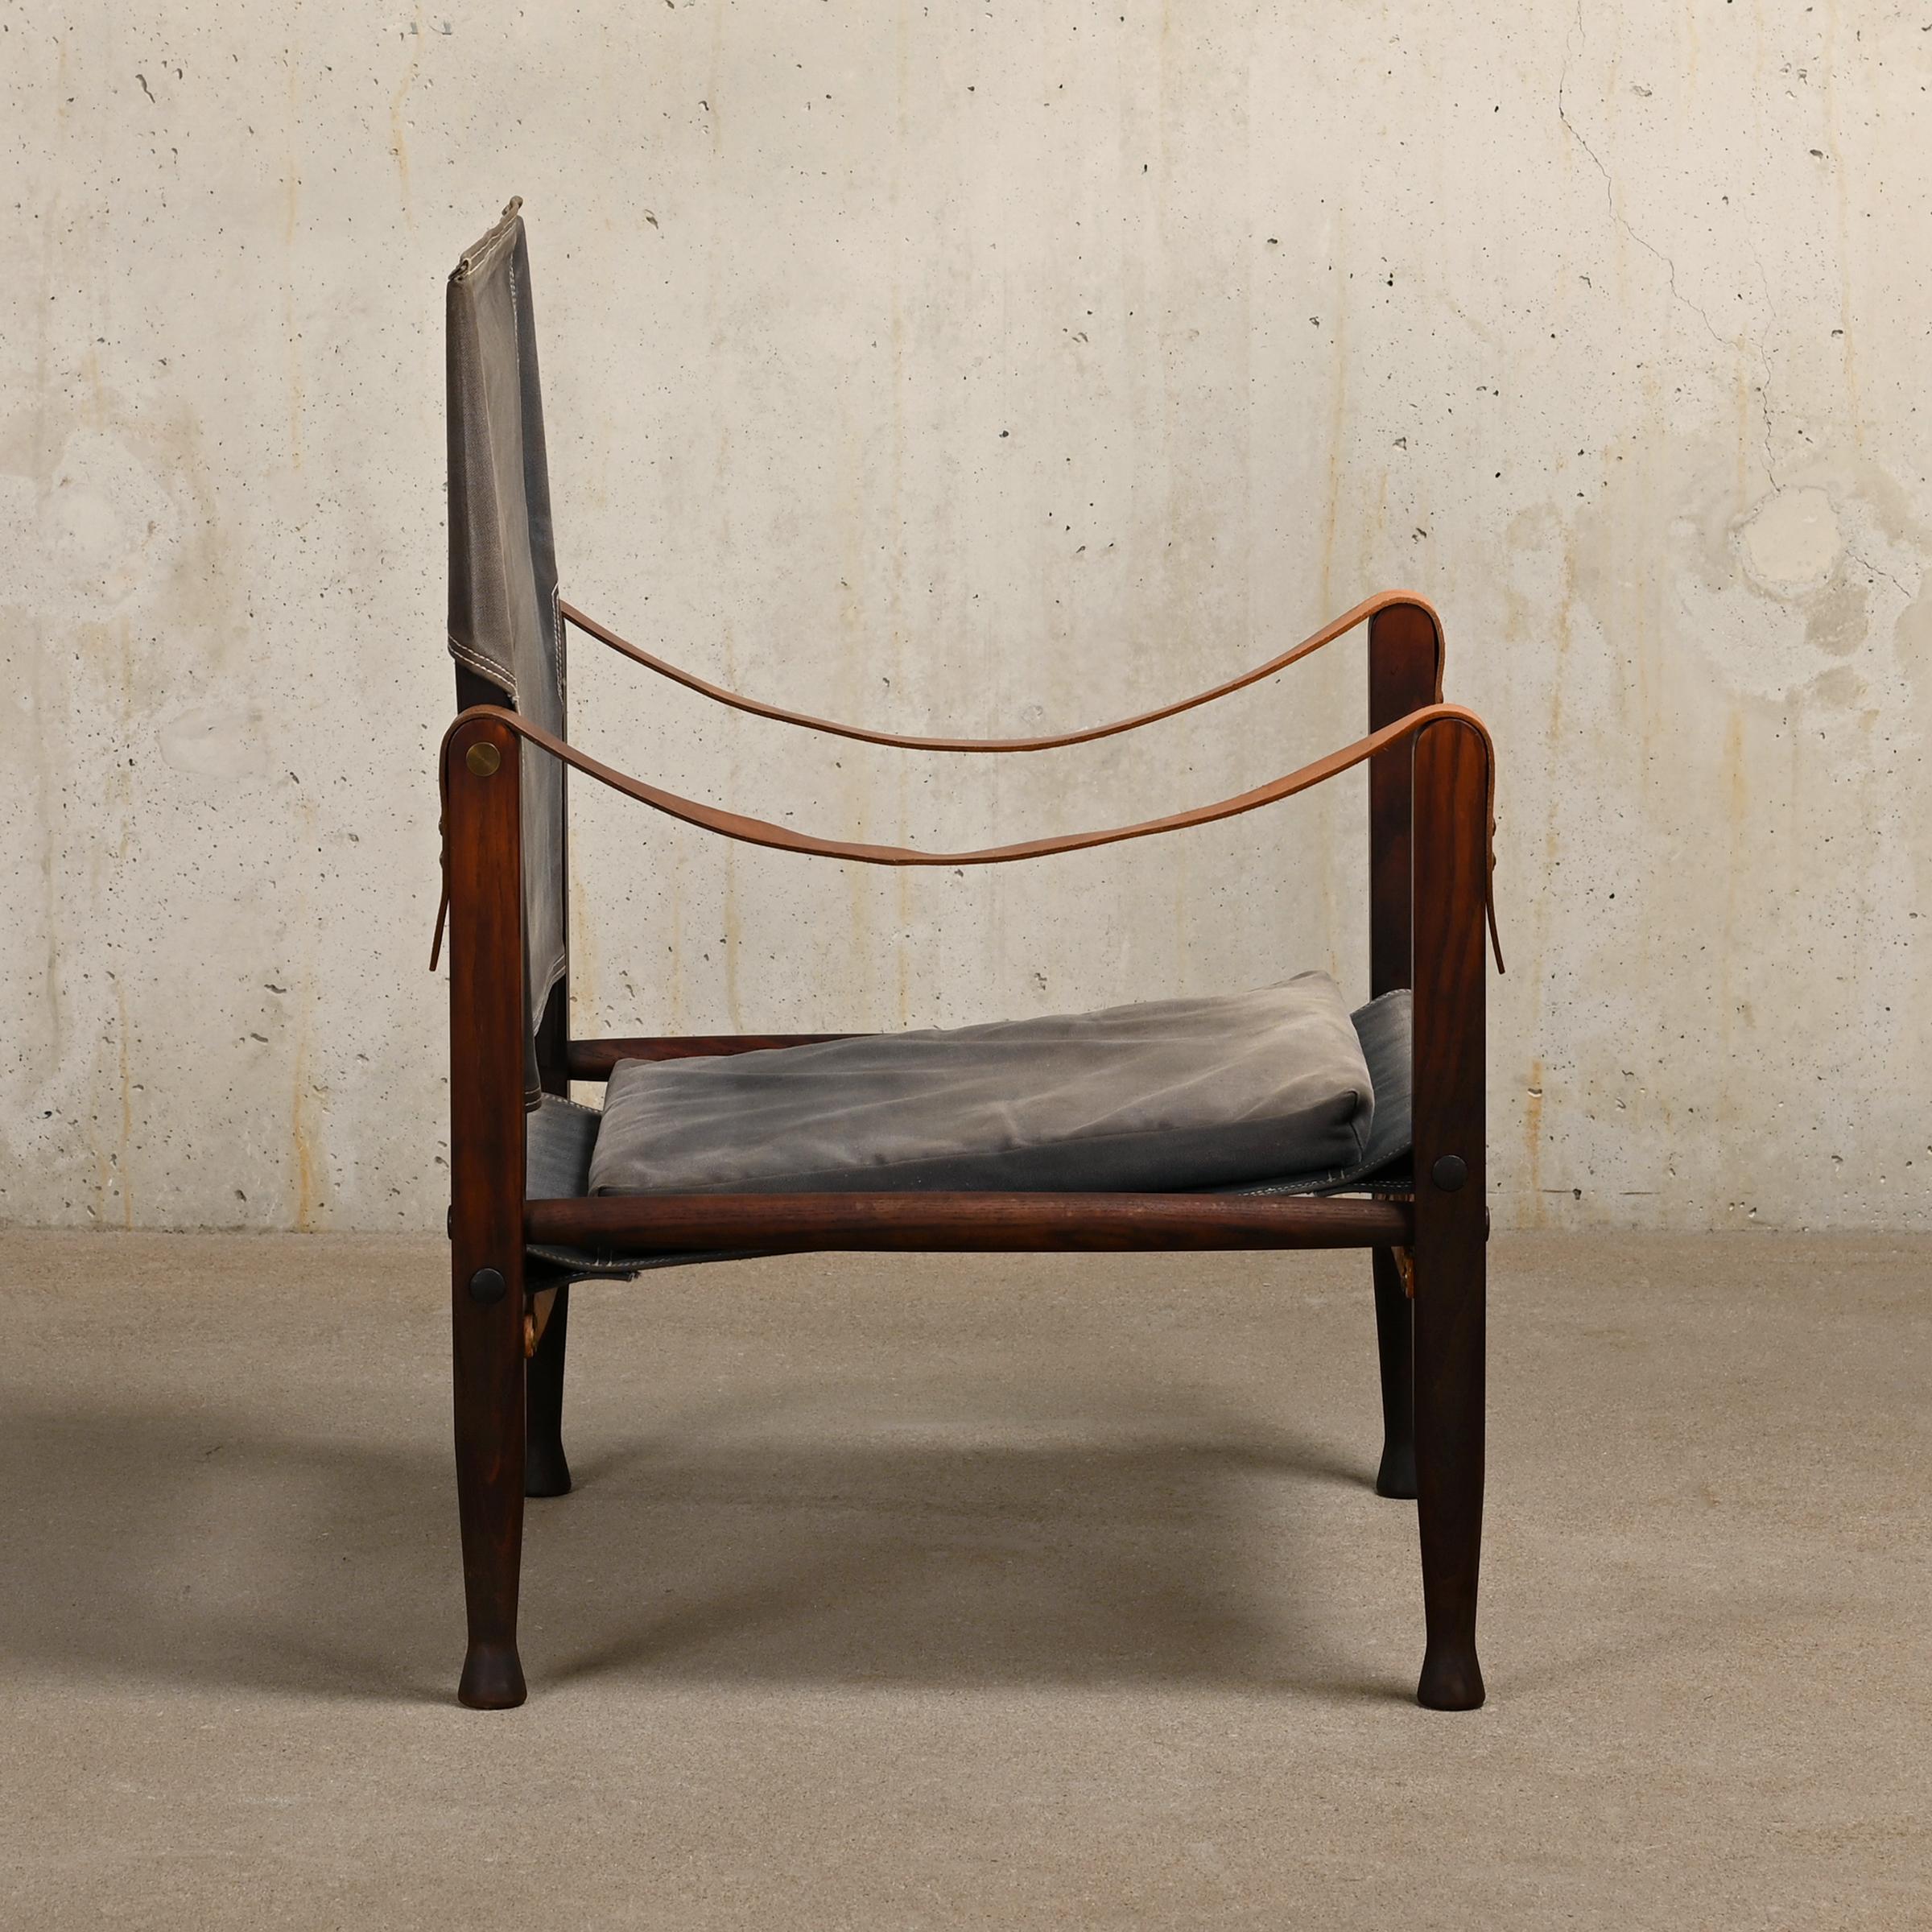 Mid-20th Century Kaare Klint Safari Chair in Grey Canvas and Dark Stained Ash for Rud Rasmussen